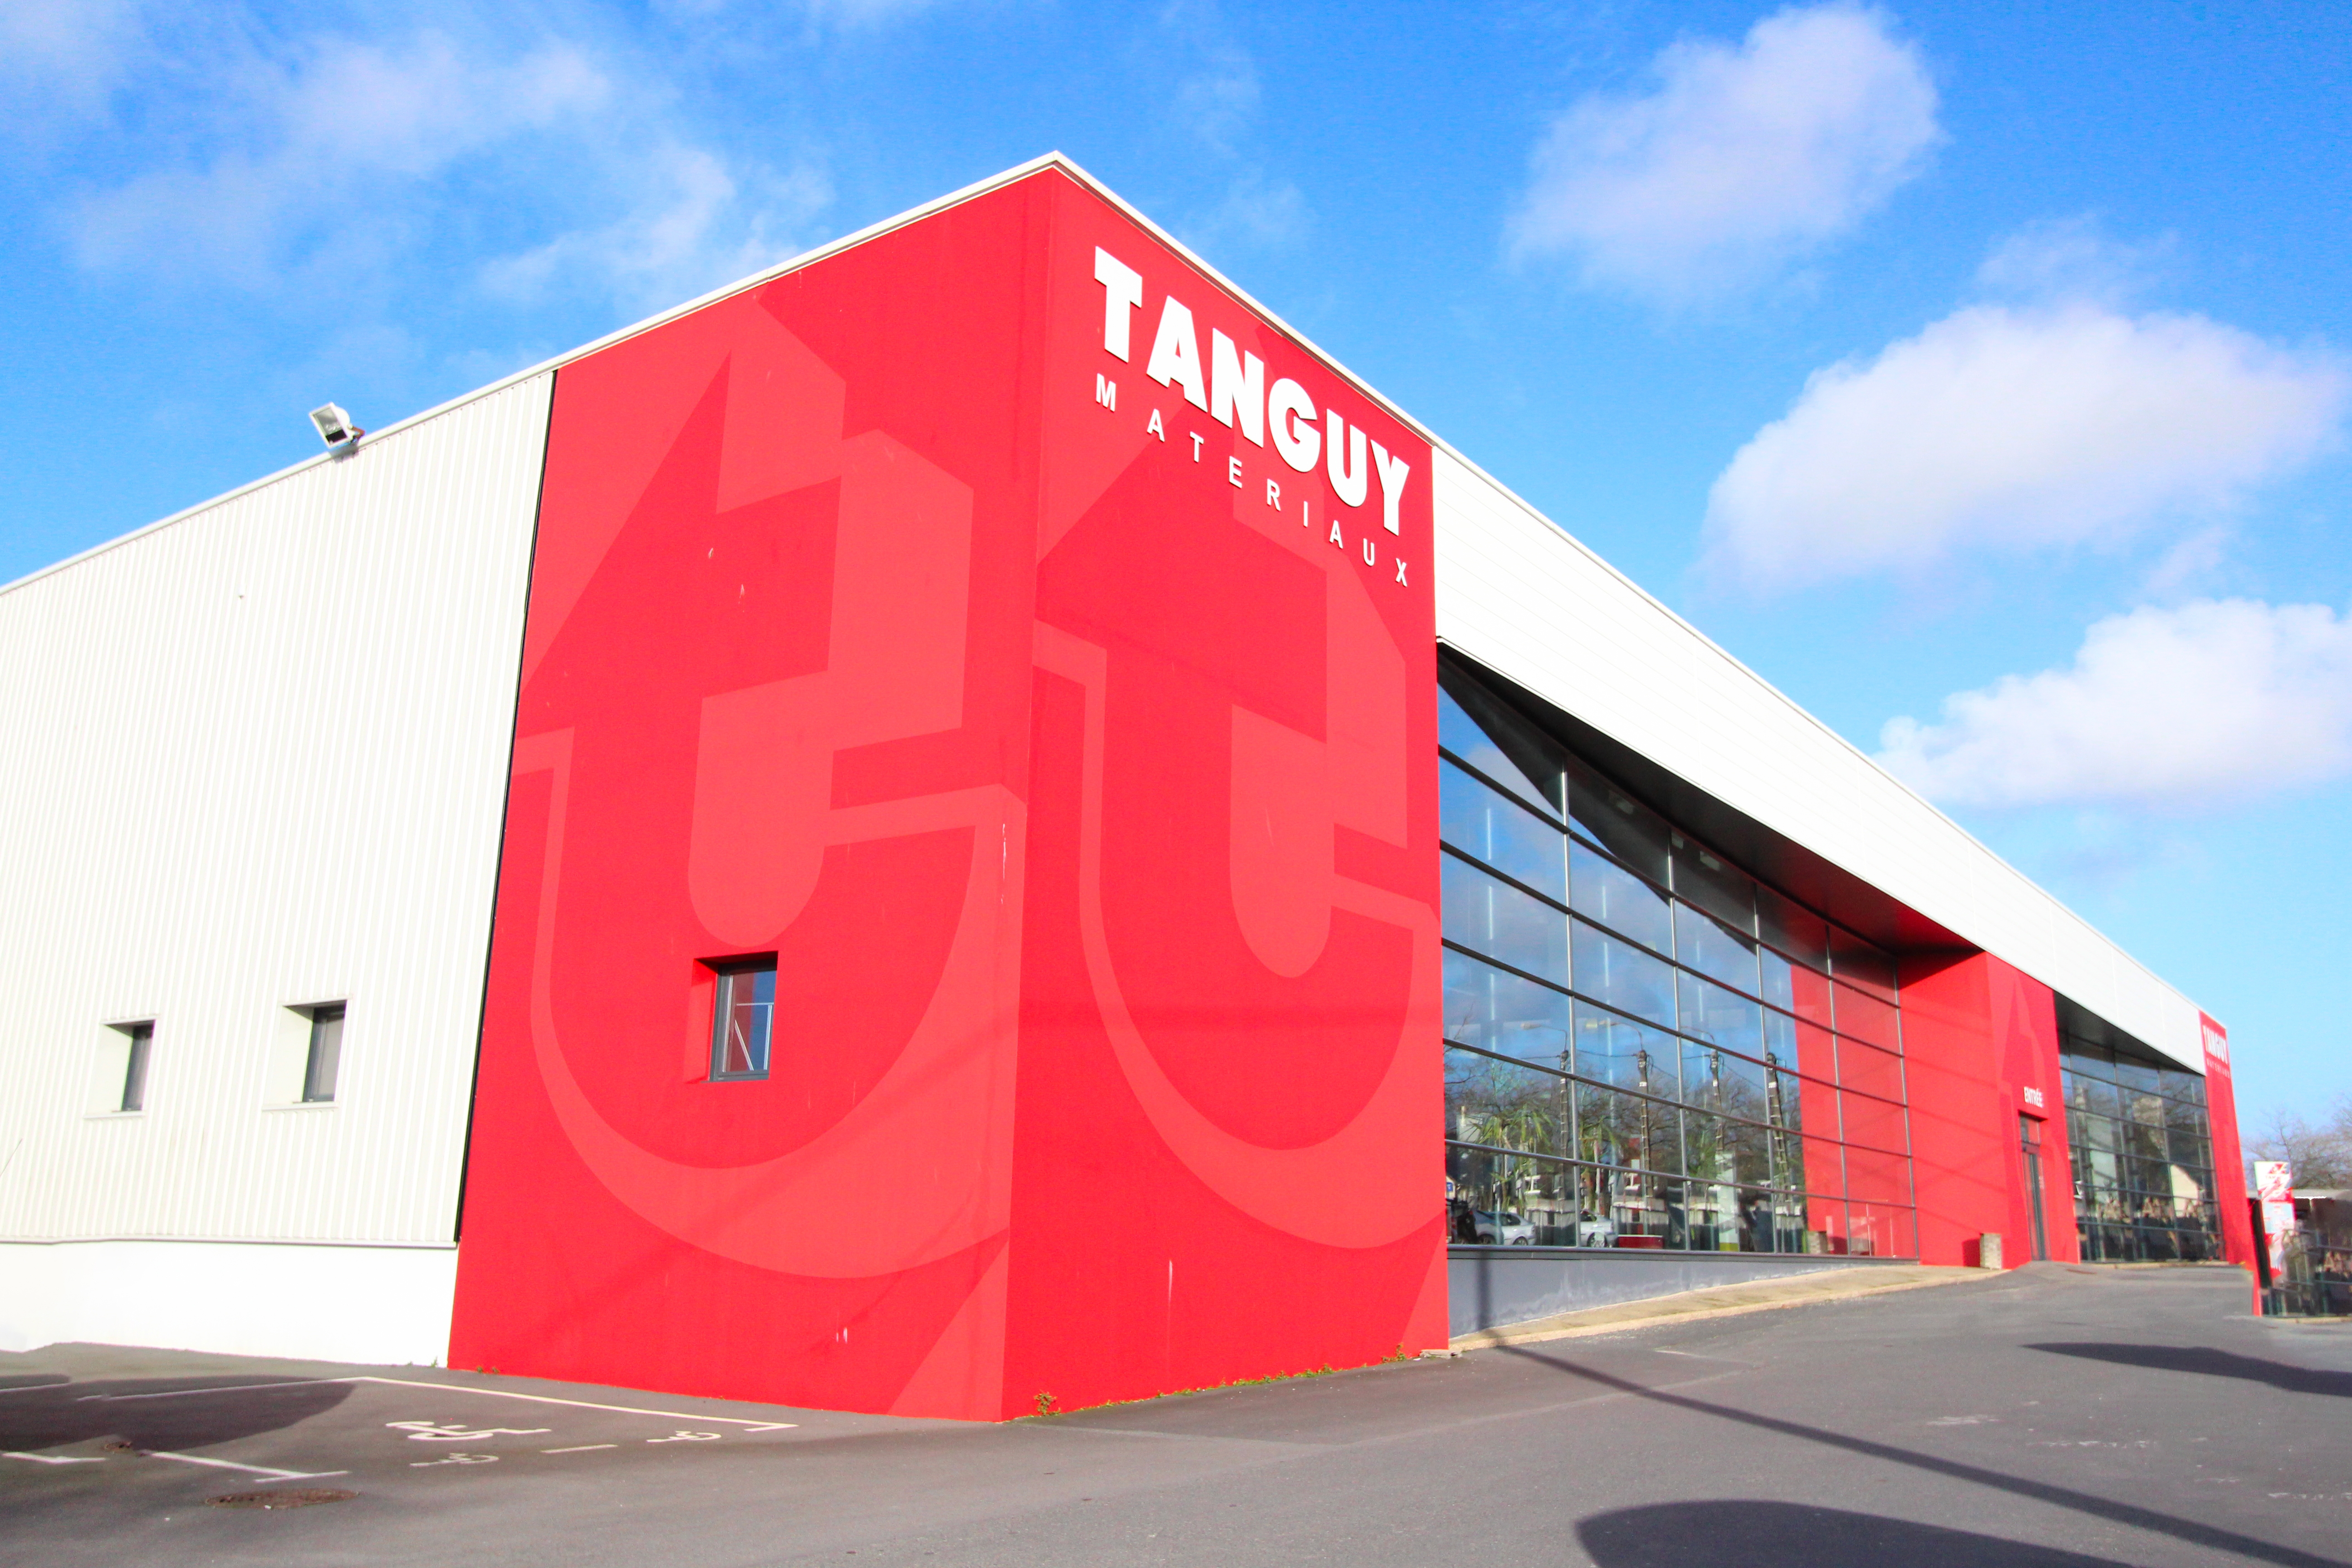 photo of the exterior of a white and red tanguy building